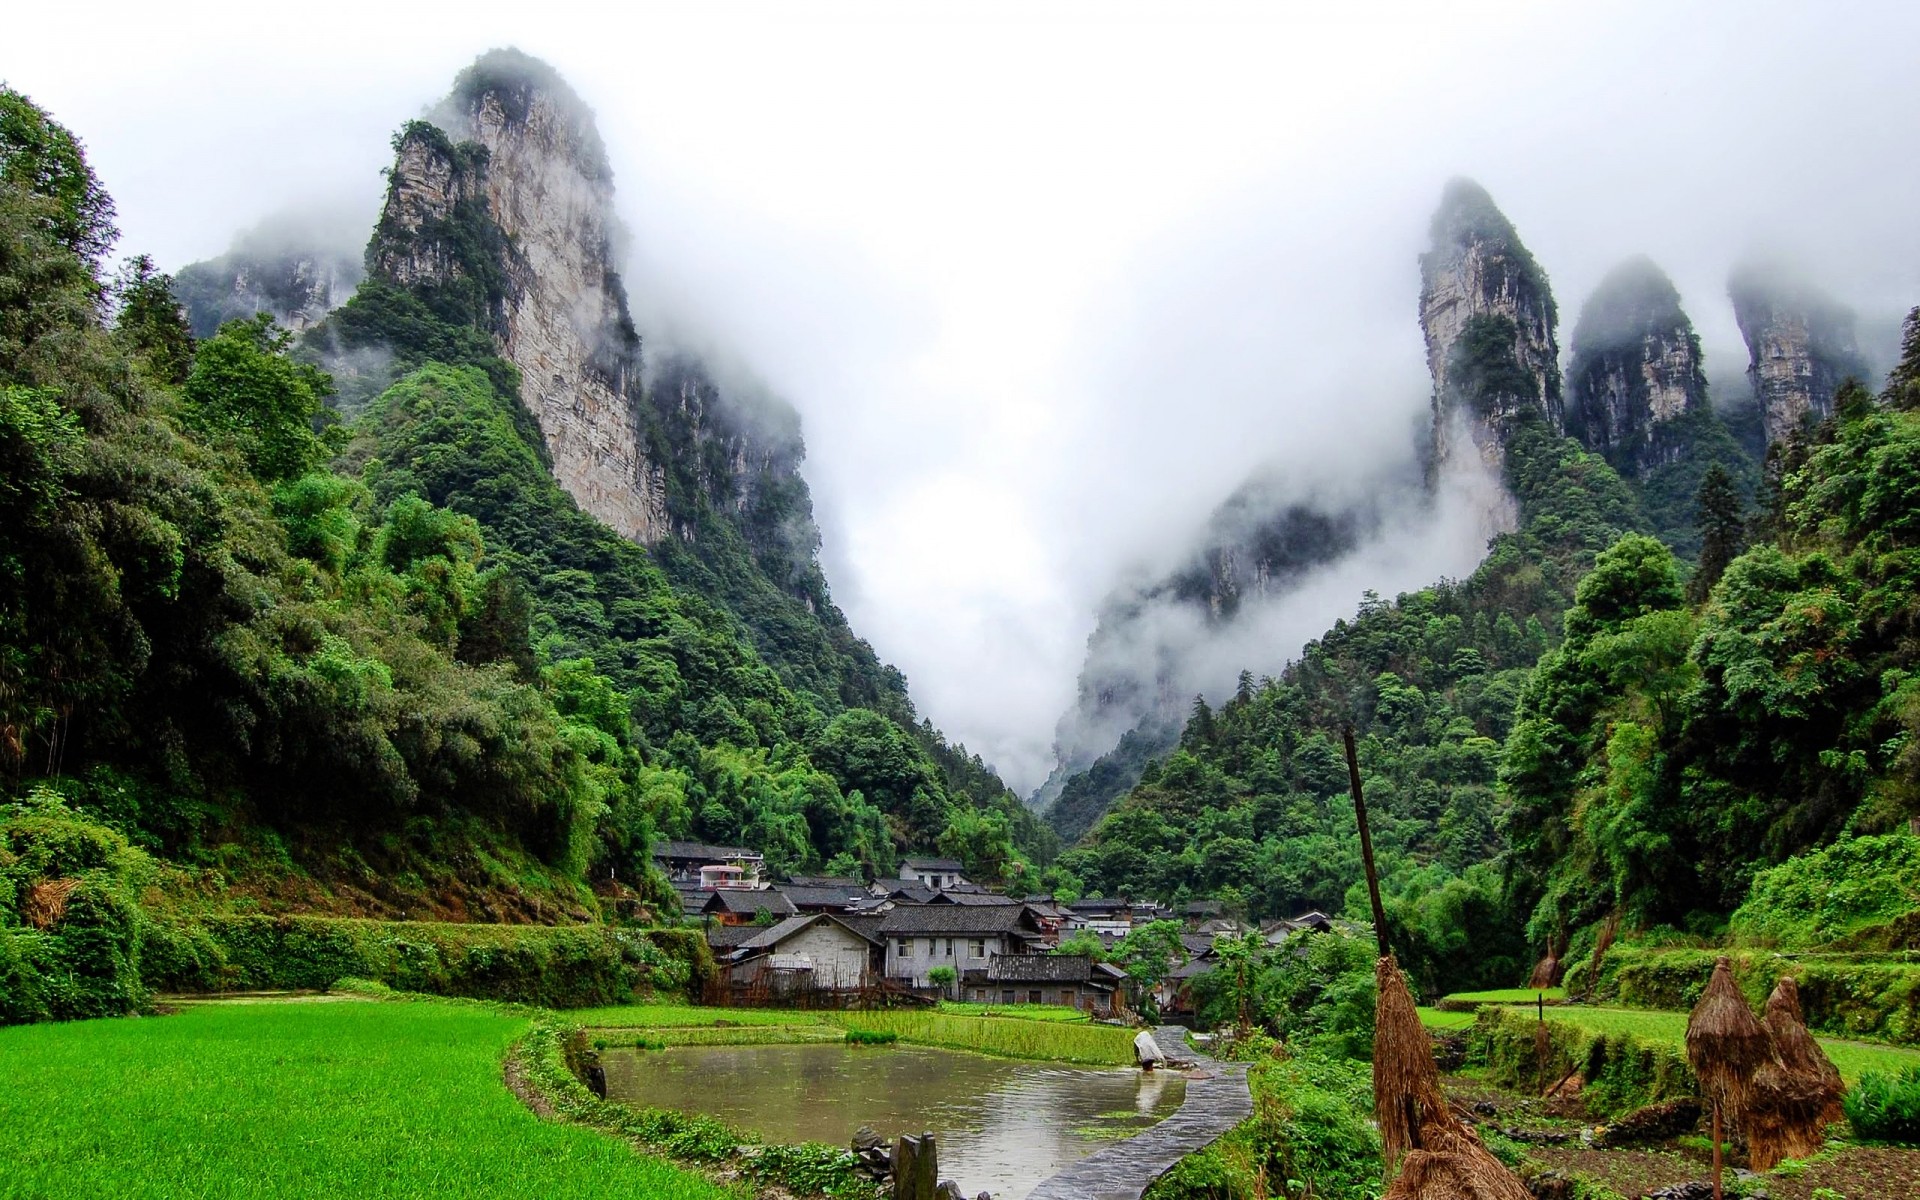 china mountain nature travel wood landscape water outdoors valley tree rock river summer fog mist scenic grass sky hill tourism mountains rocks forest